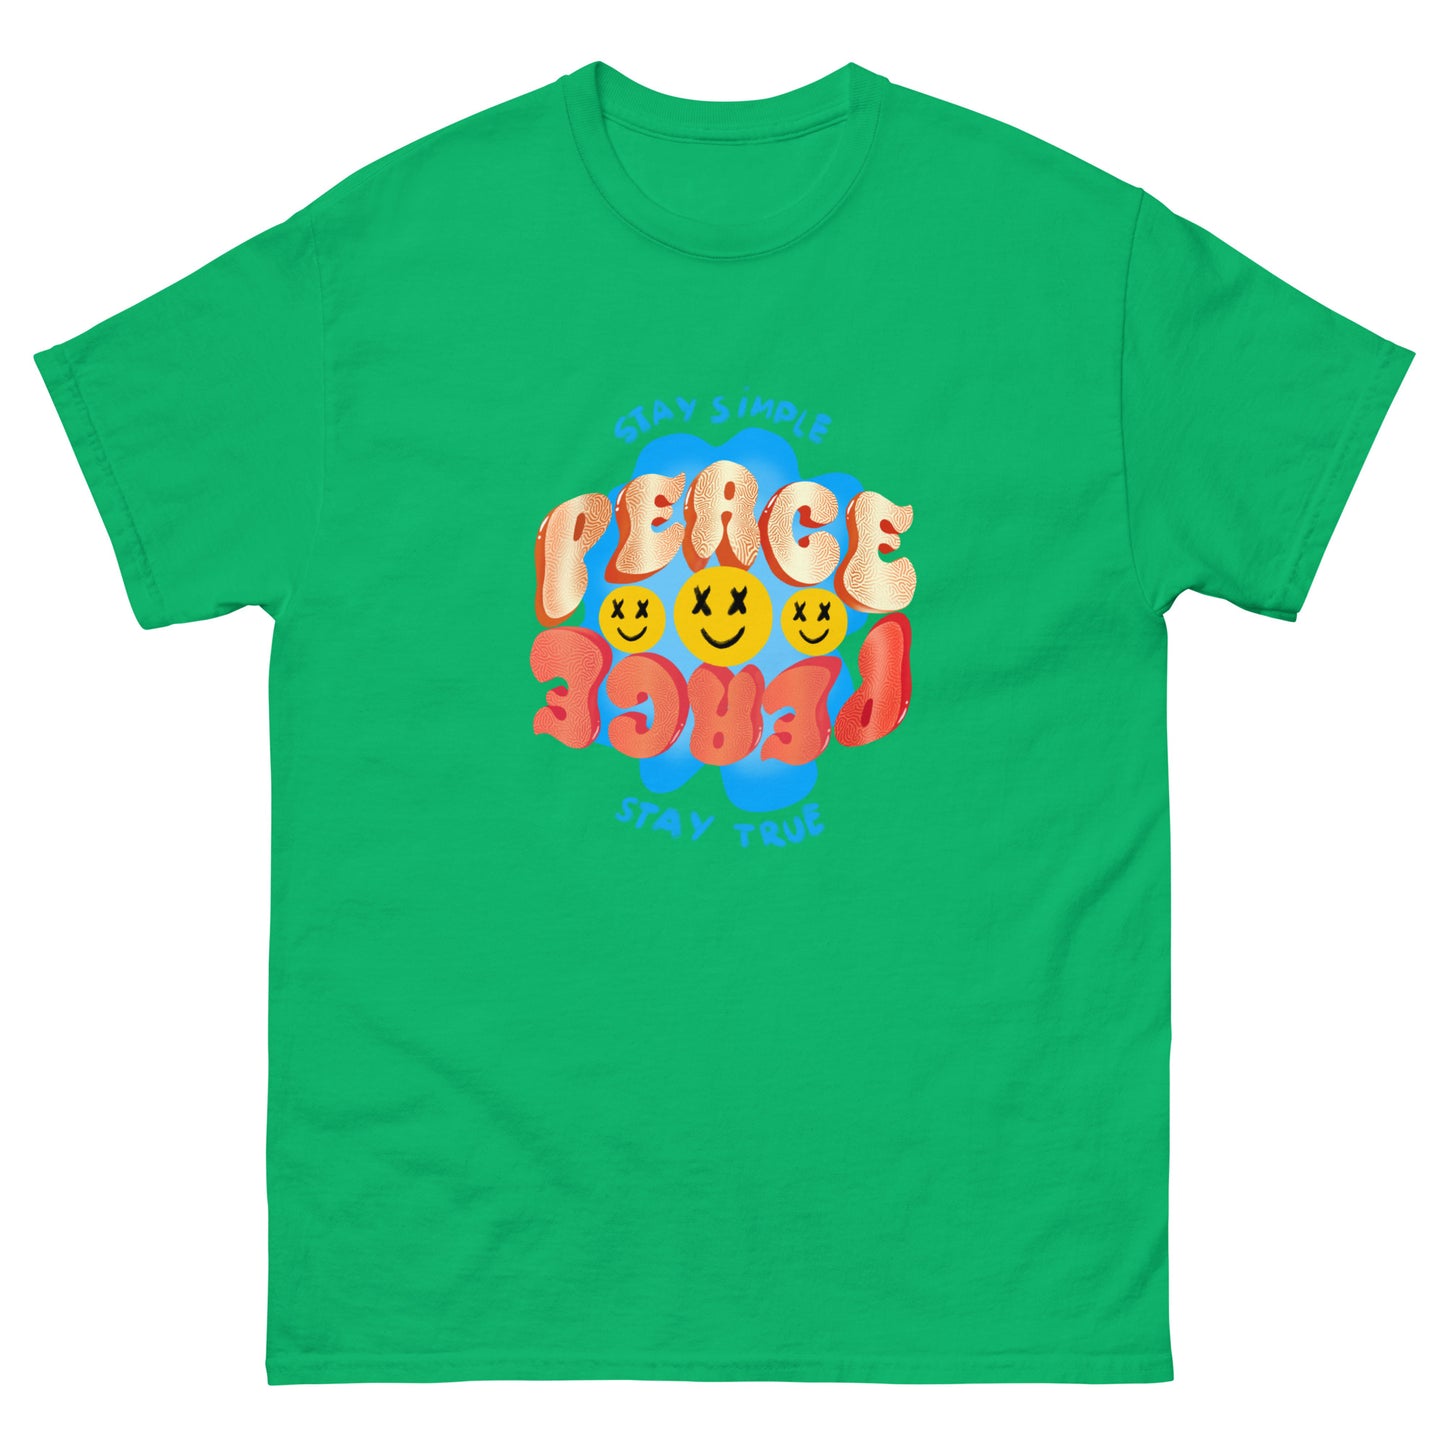 irish green color cotton t shirt with colorful print